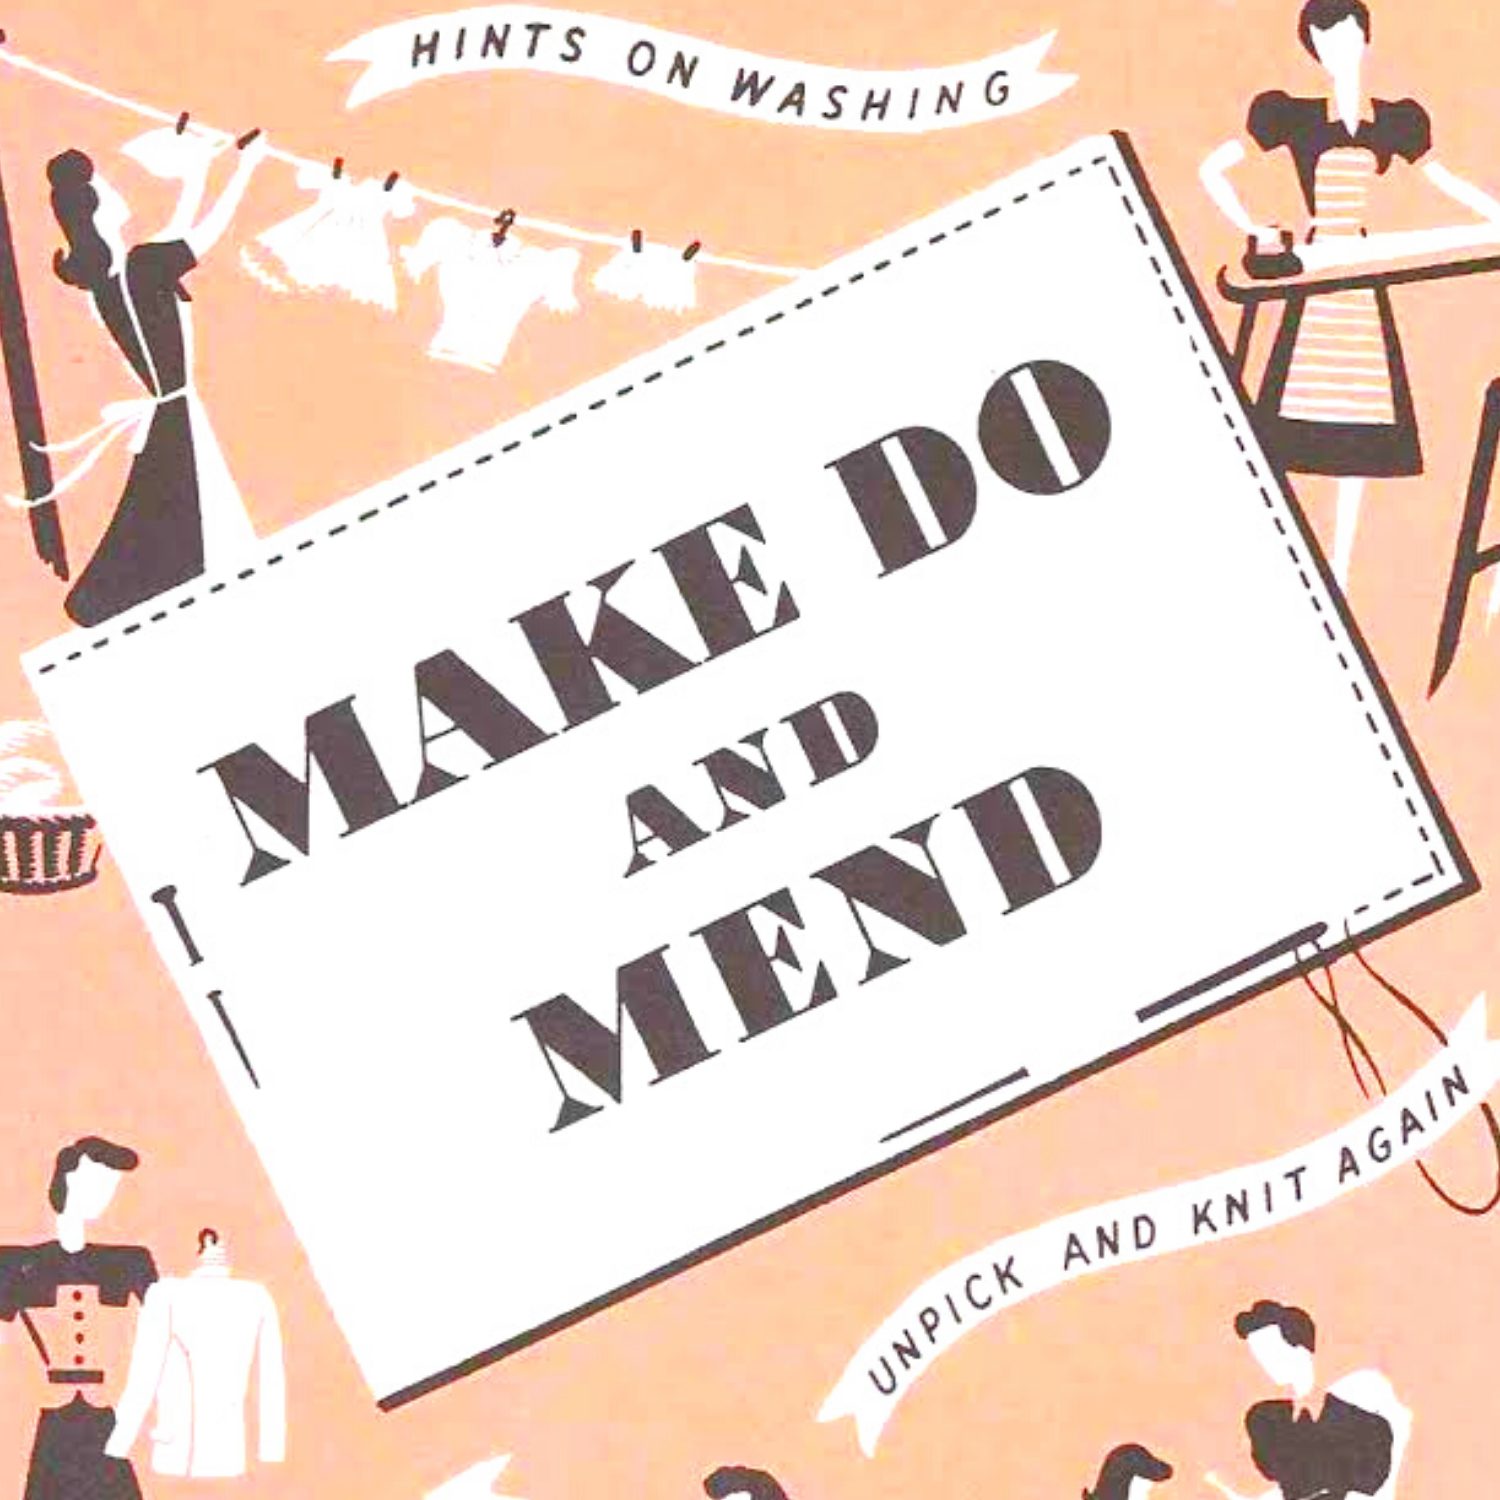 Make do and Mend 1940's wartime booklet hints on washing unpick and knit again